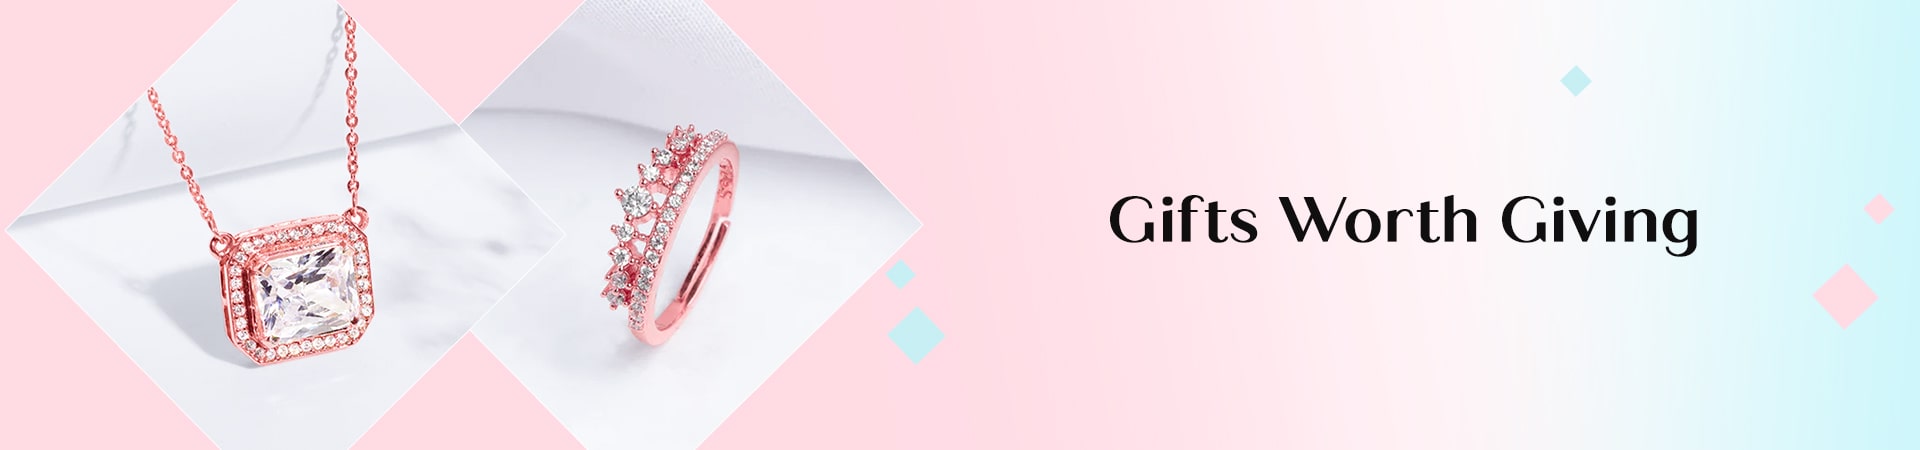 Gift Ideas AI - The Ultimate Gift Finder